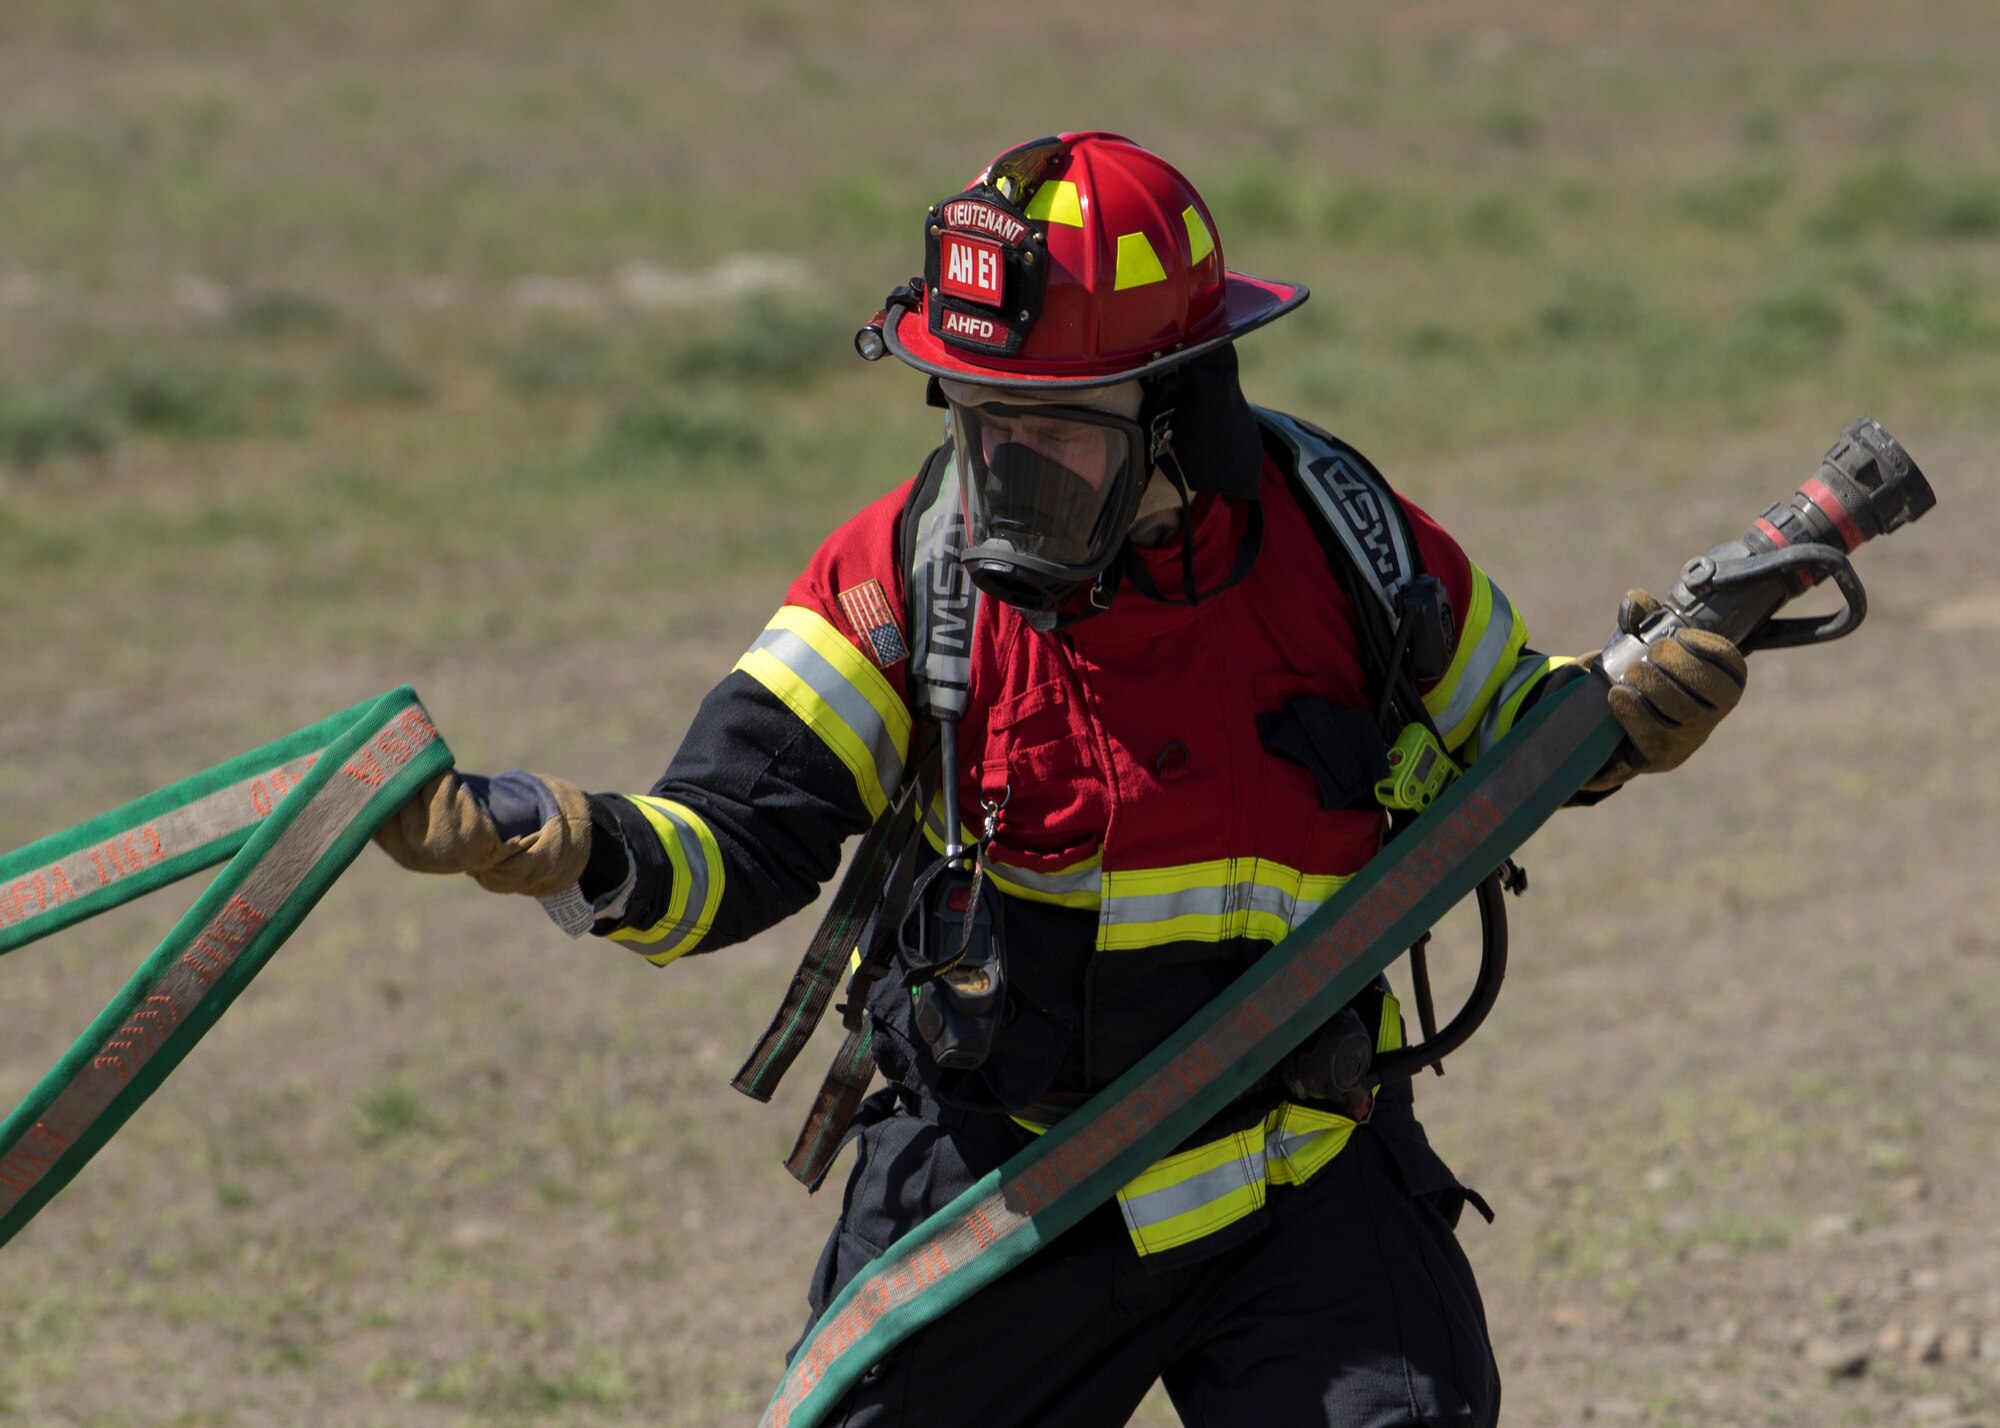 A firefighter from the Airway Heights Fire Department pulls out lengths of fire hose while preparing for a Major Accident Response Exercise drill near Fairchild Air Force Base, Washington, May 9, 2019.